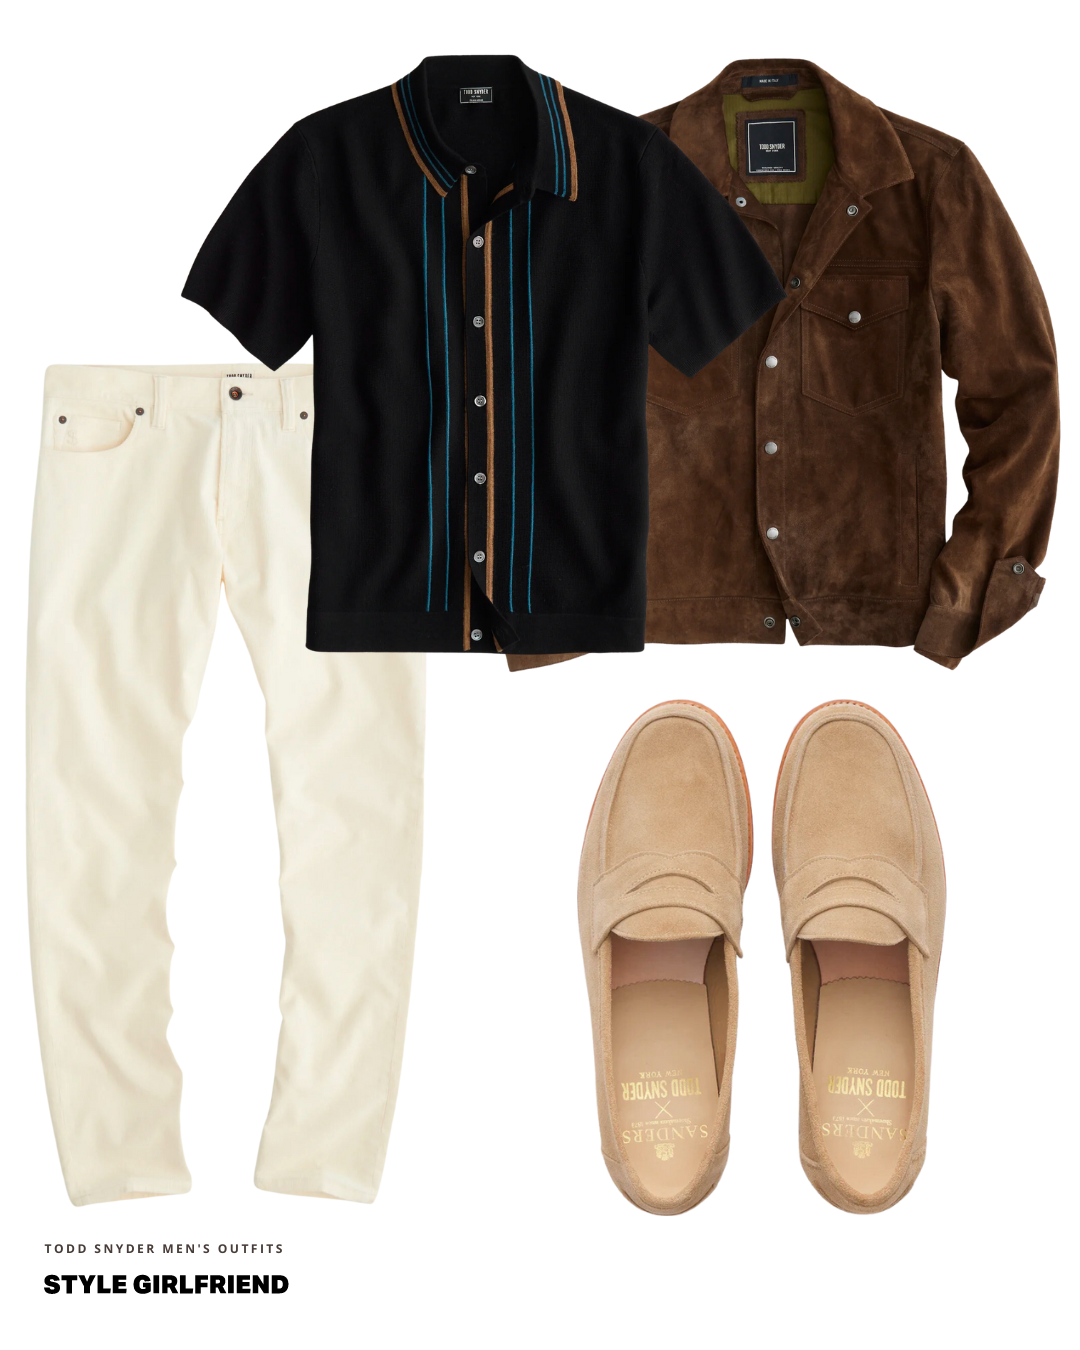 todd snyder fall outfit with suede jacket